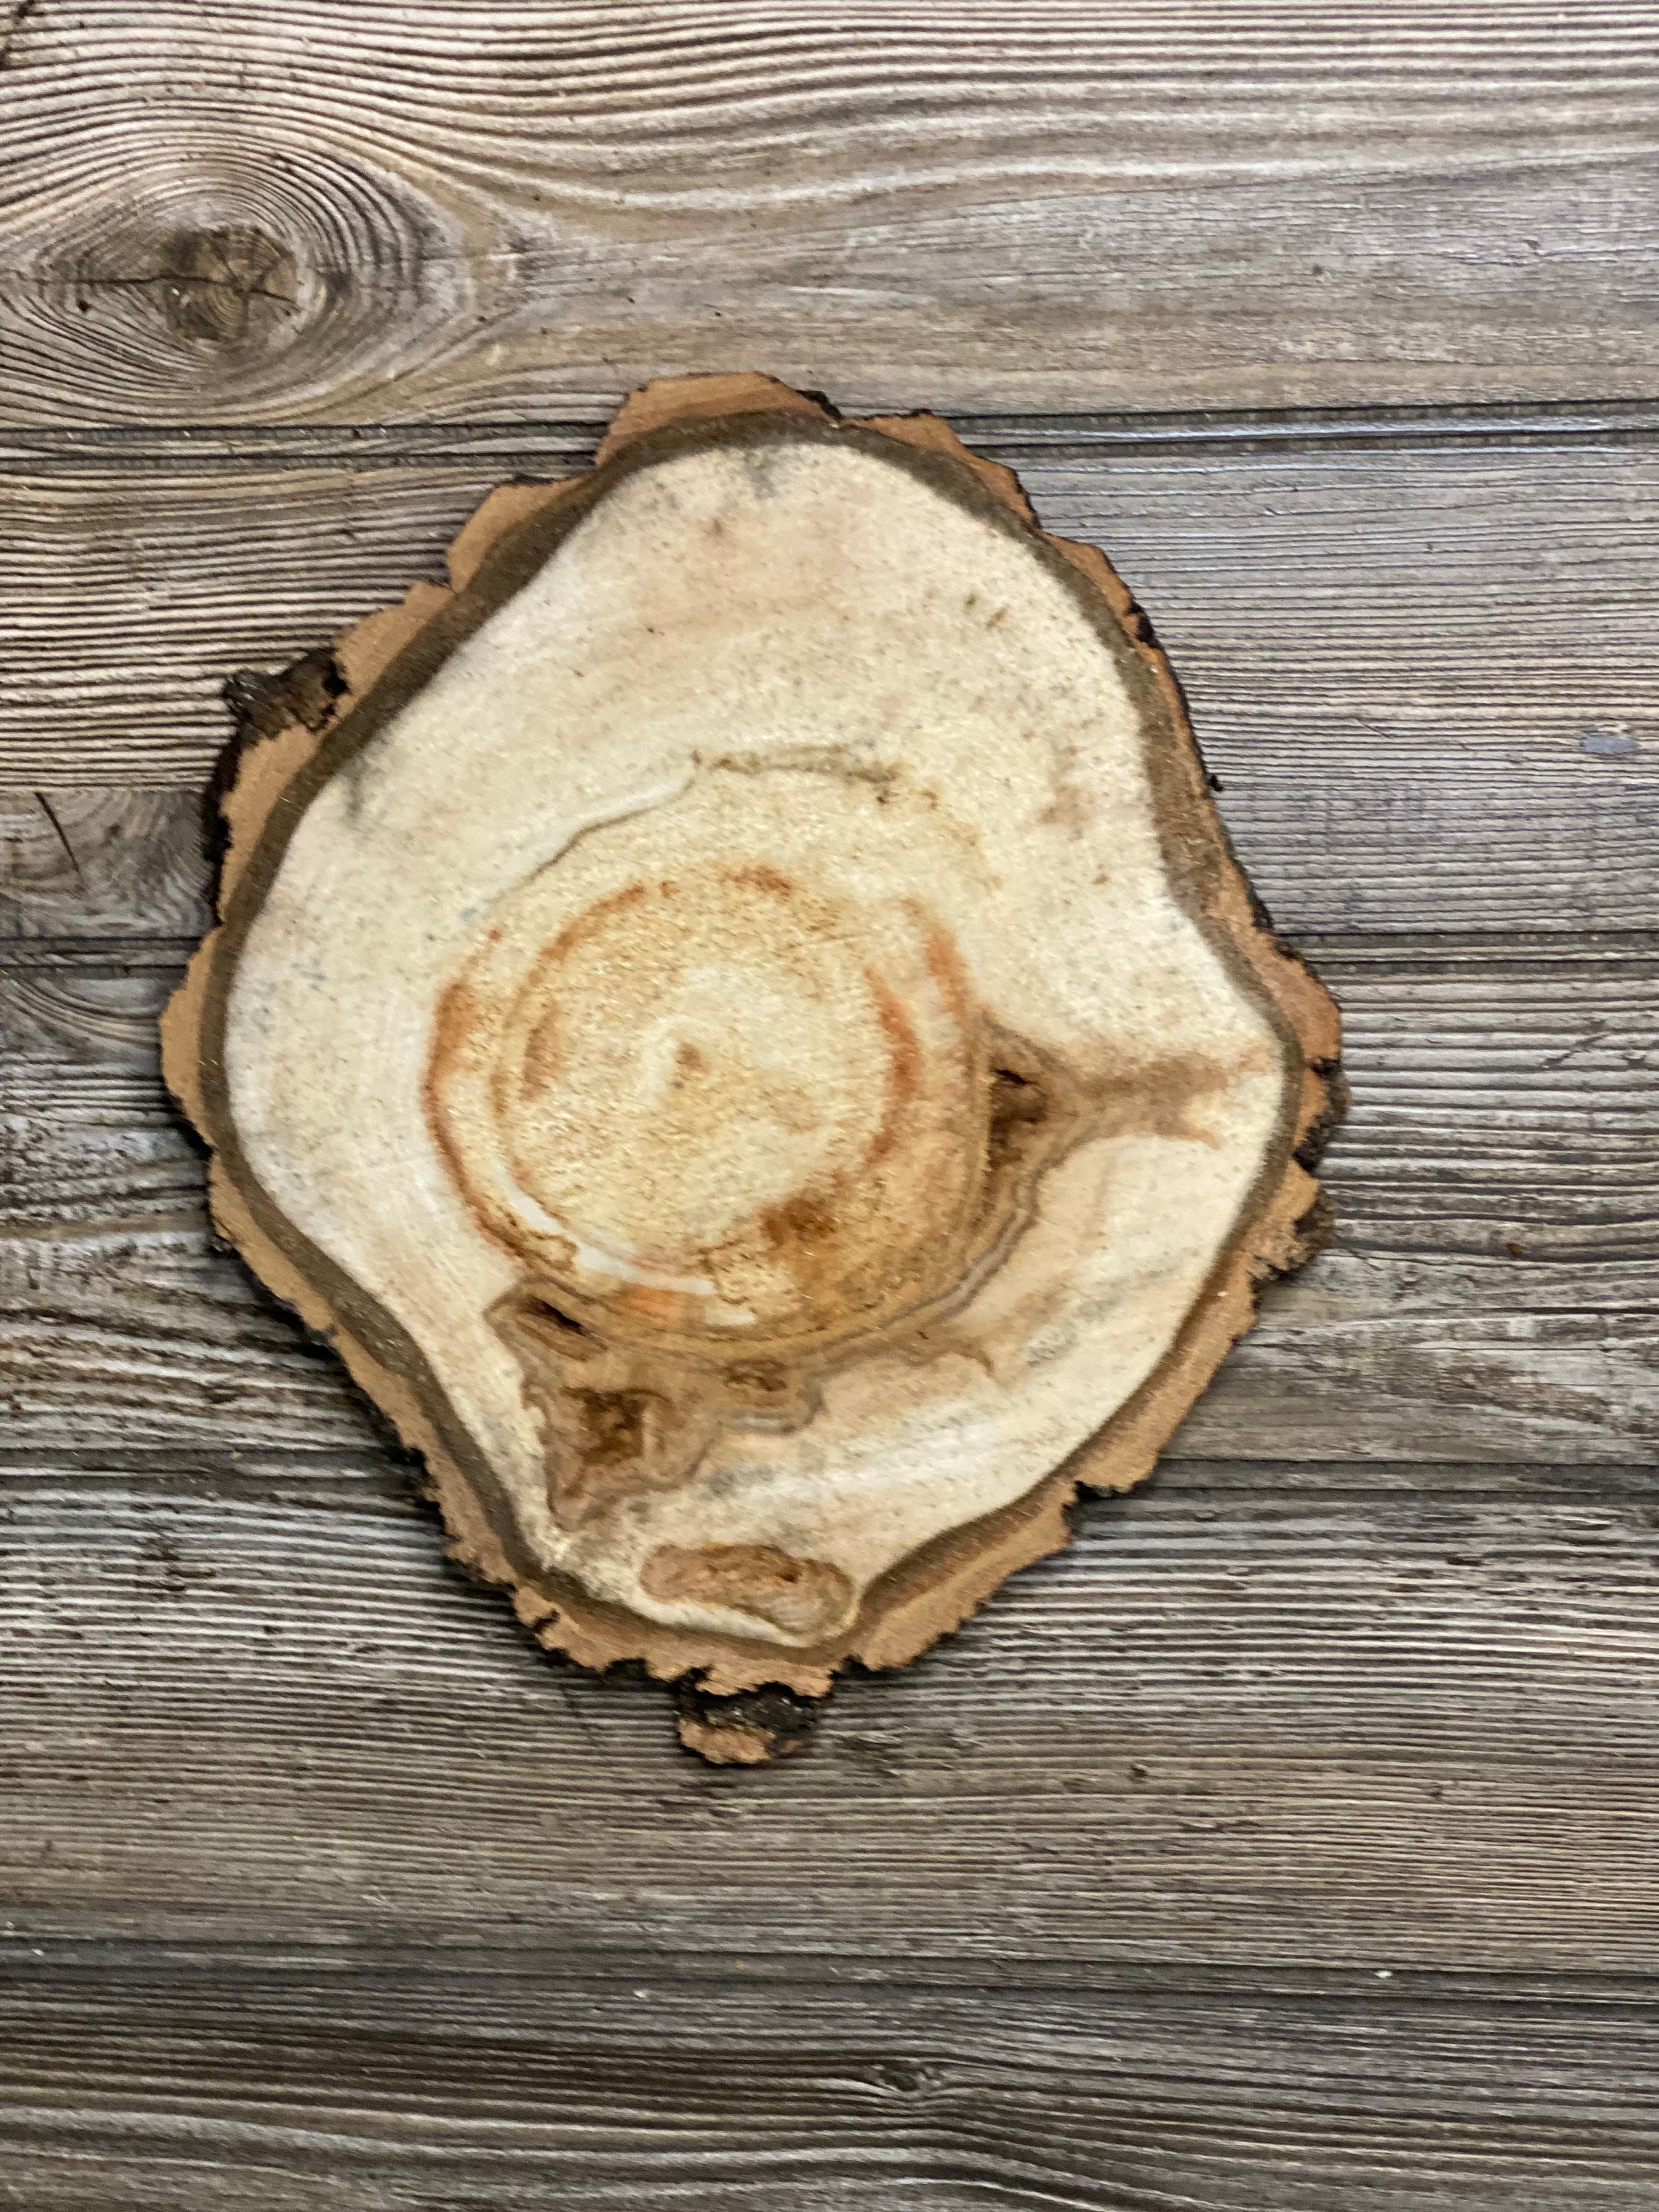 Aspen Burl Slice, Approximately 10.5 Inches Long by 9 Inches Wide and 3/4 Inch Thick